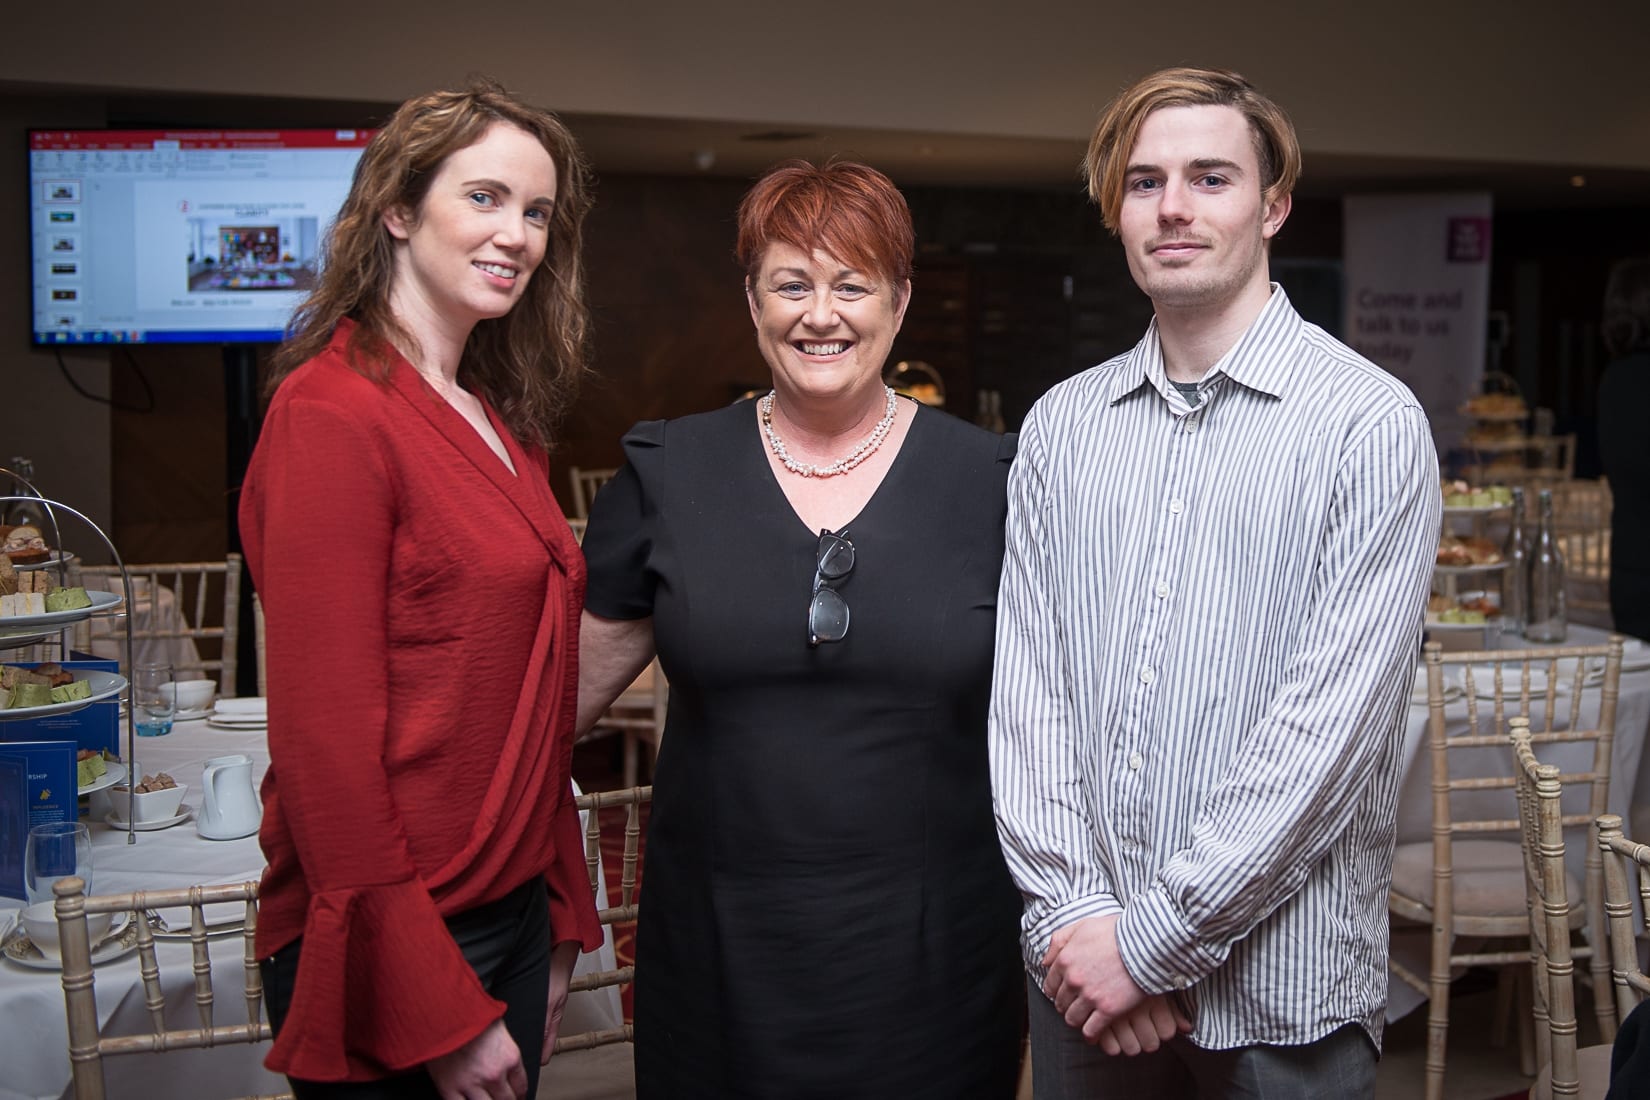 No repro fee- At the Limerick Chamber business briefing on ‘Spending Trends: Tourism, Retail &  Hospitality Industry Insights & Marketing Trends’ at the Savoy Hotel - 22-01-2019, From Left to Right: Mary McNamee- Limerick Chamber, Ann Murray - The Savoy Hotel, Fionán Coughlan - The Edge Clothing. 
Photo credit Shauna Kennedy